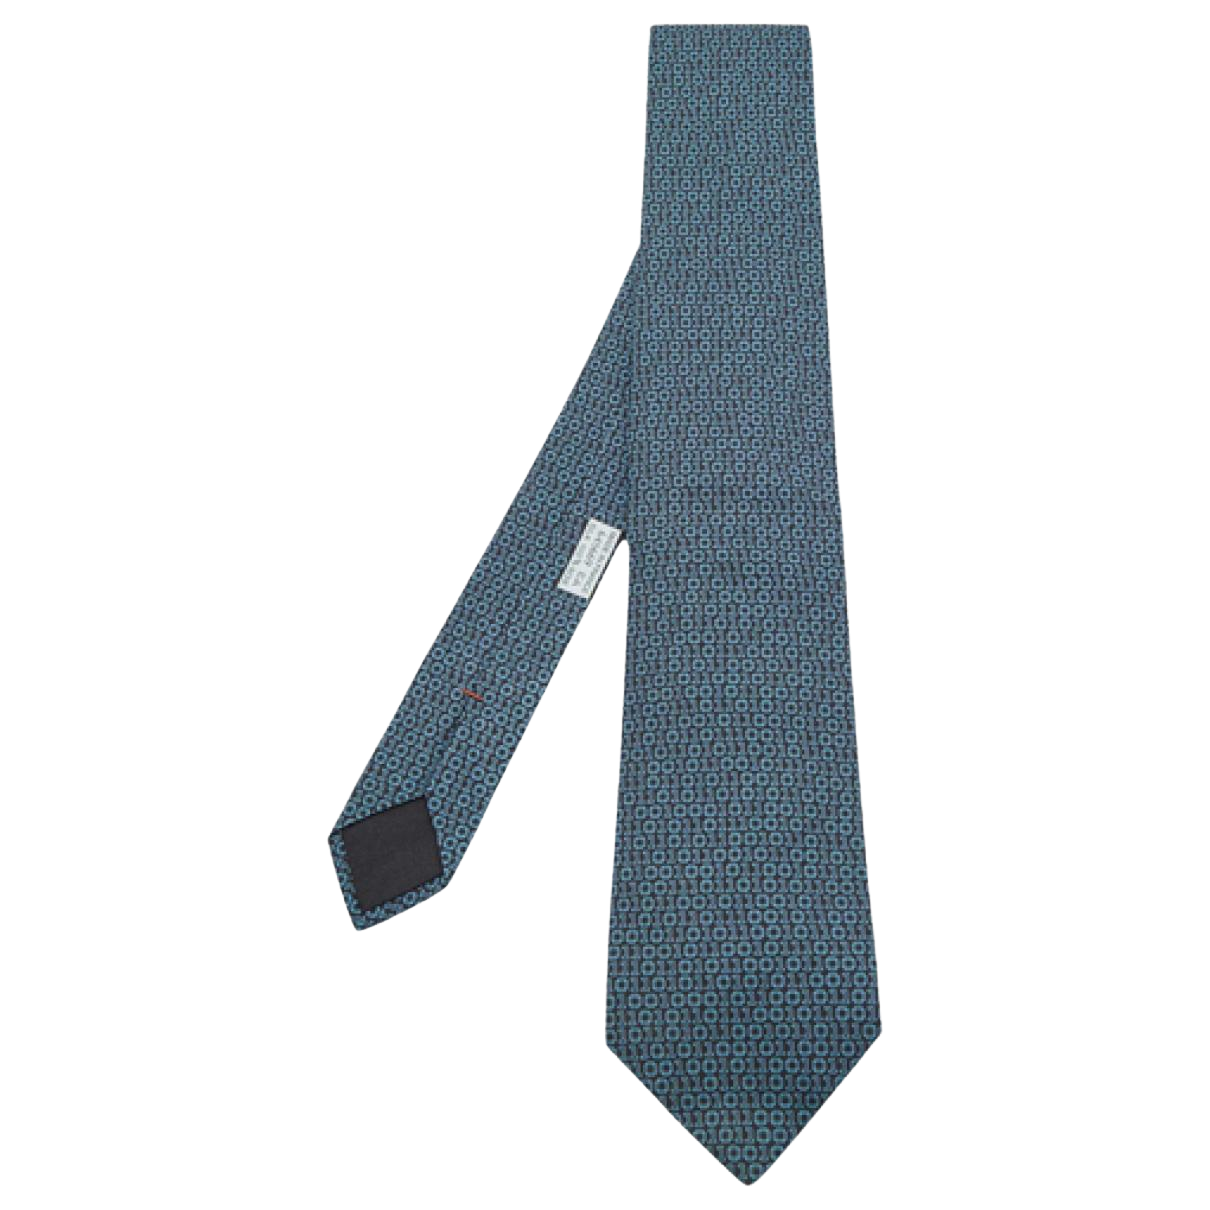 https://storage.googleapis.com/download/storage/v1/b/whering.appspot.com/o/marketplace_product_images%2Fherms-silk-tie-navy-ftJNCD9uXXhAUBbQ5Dxdfs.png?generation=1690174838563555&alt=media